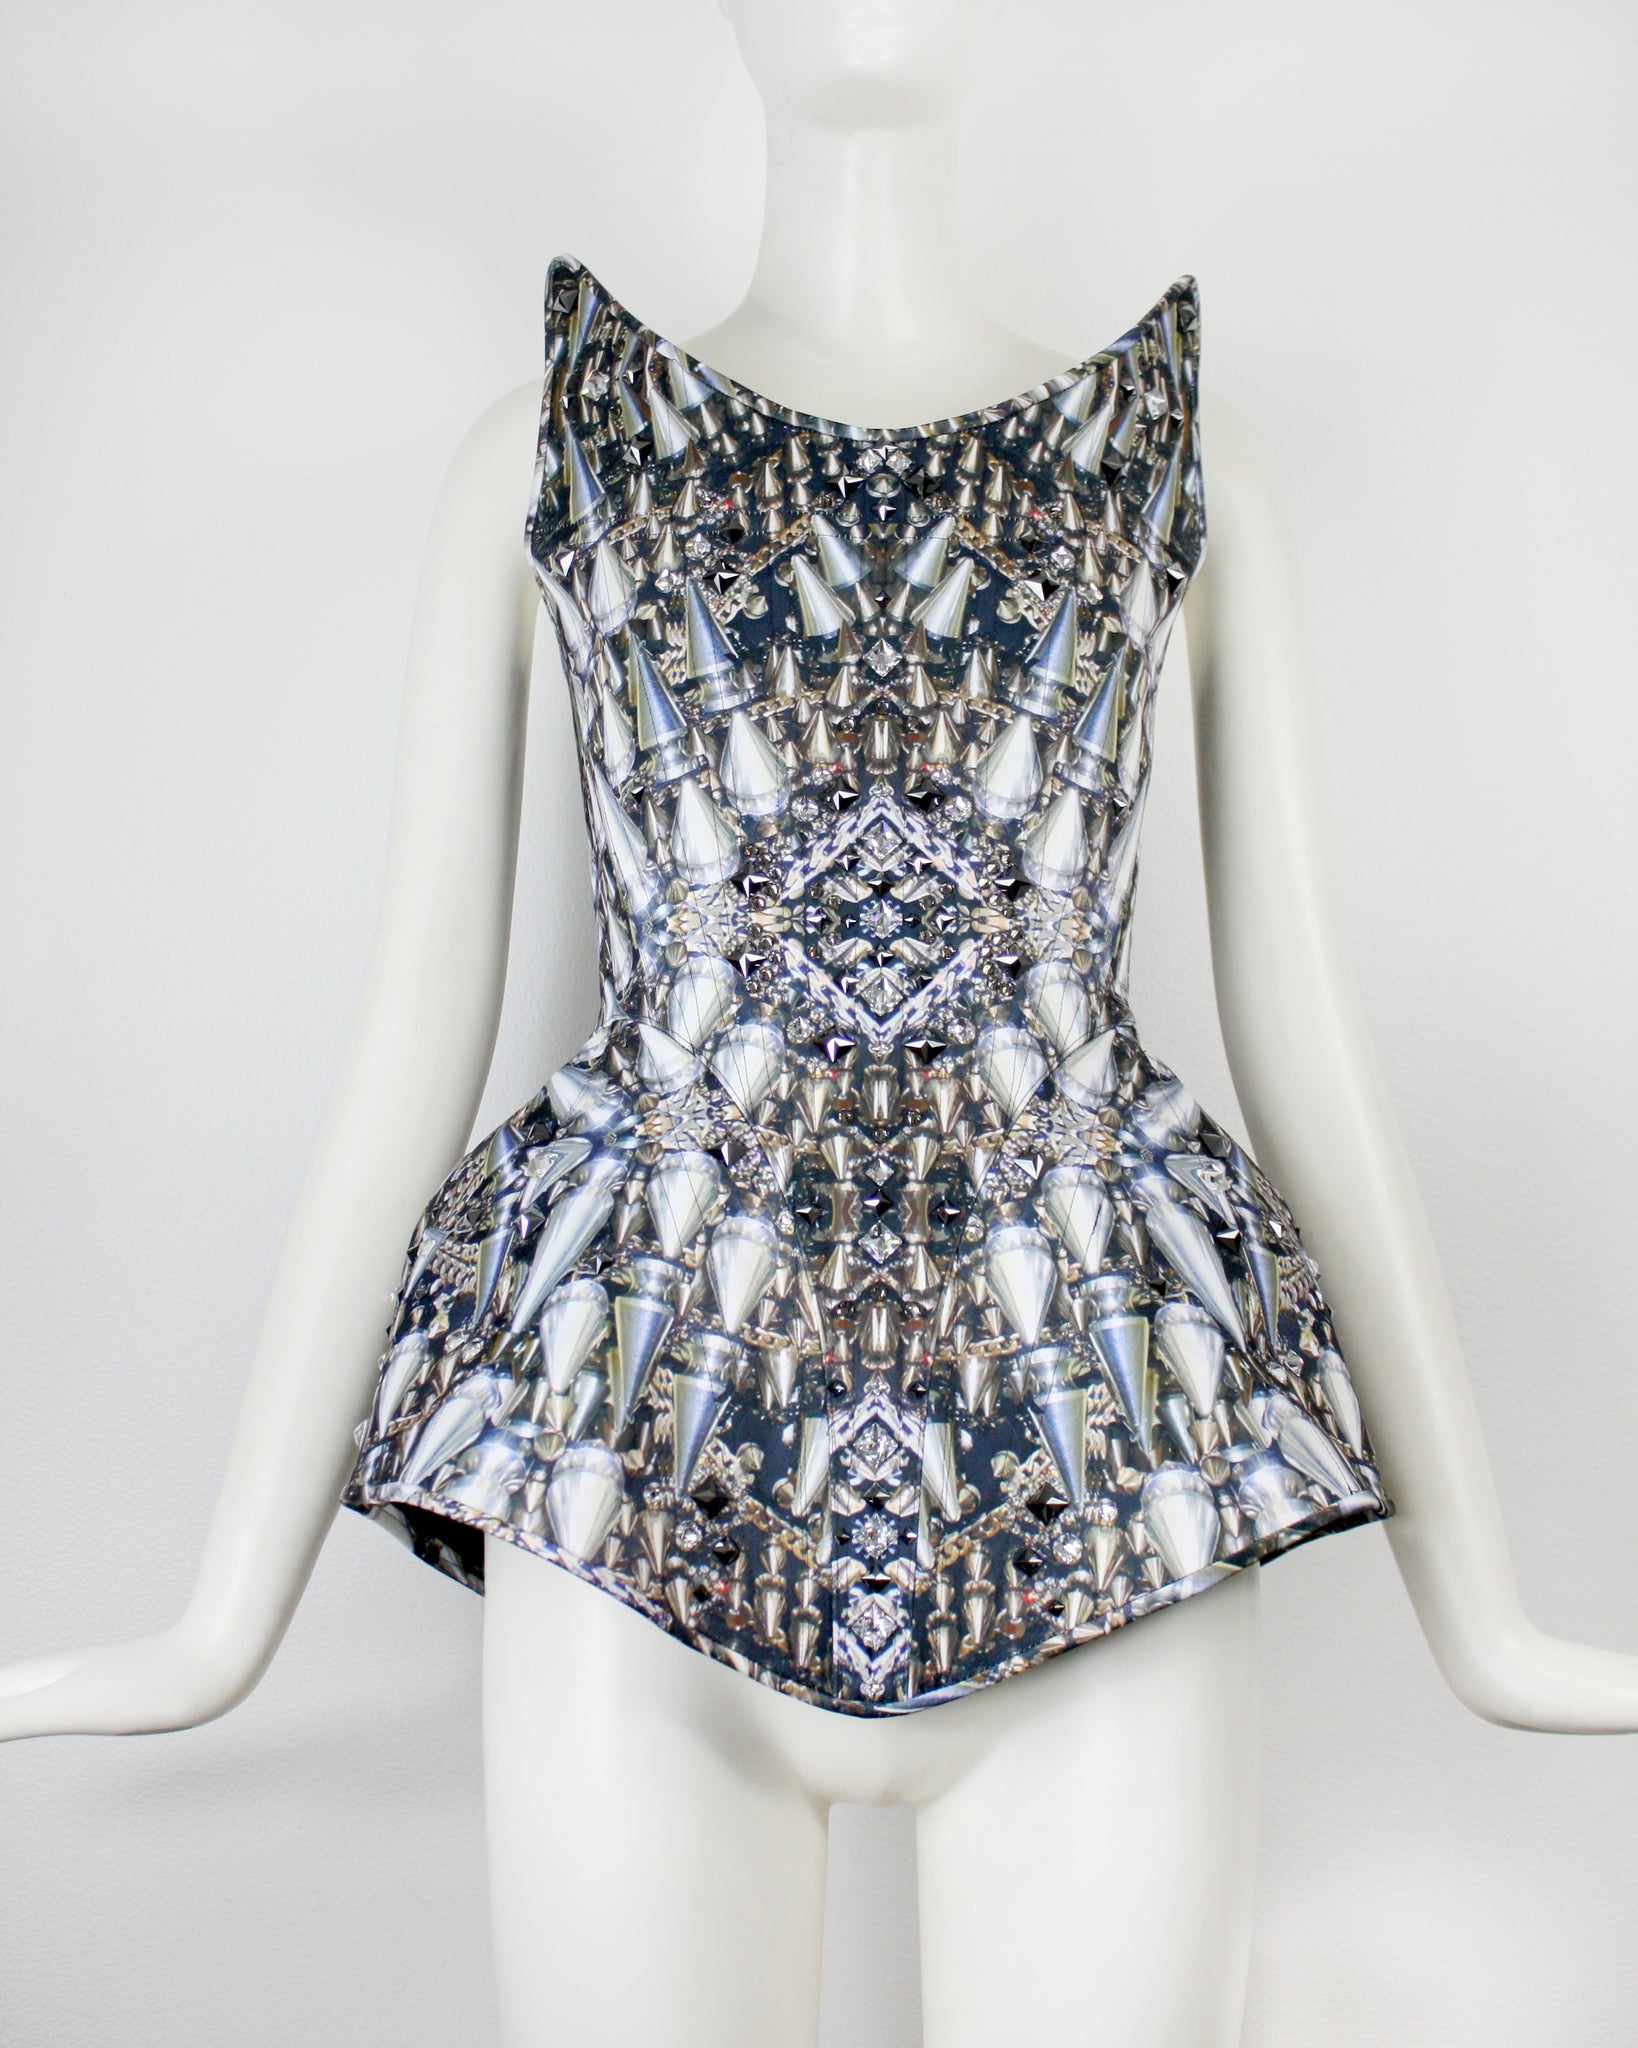 Spike Print Corset with Crystal Detail